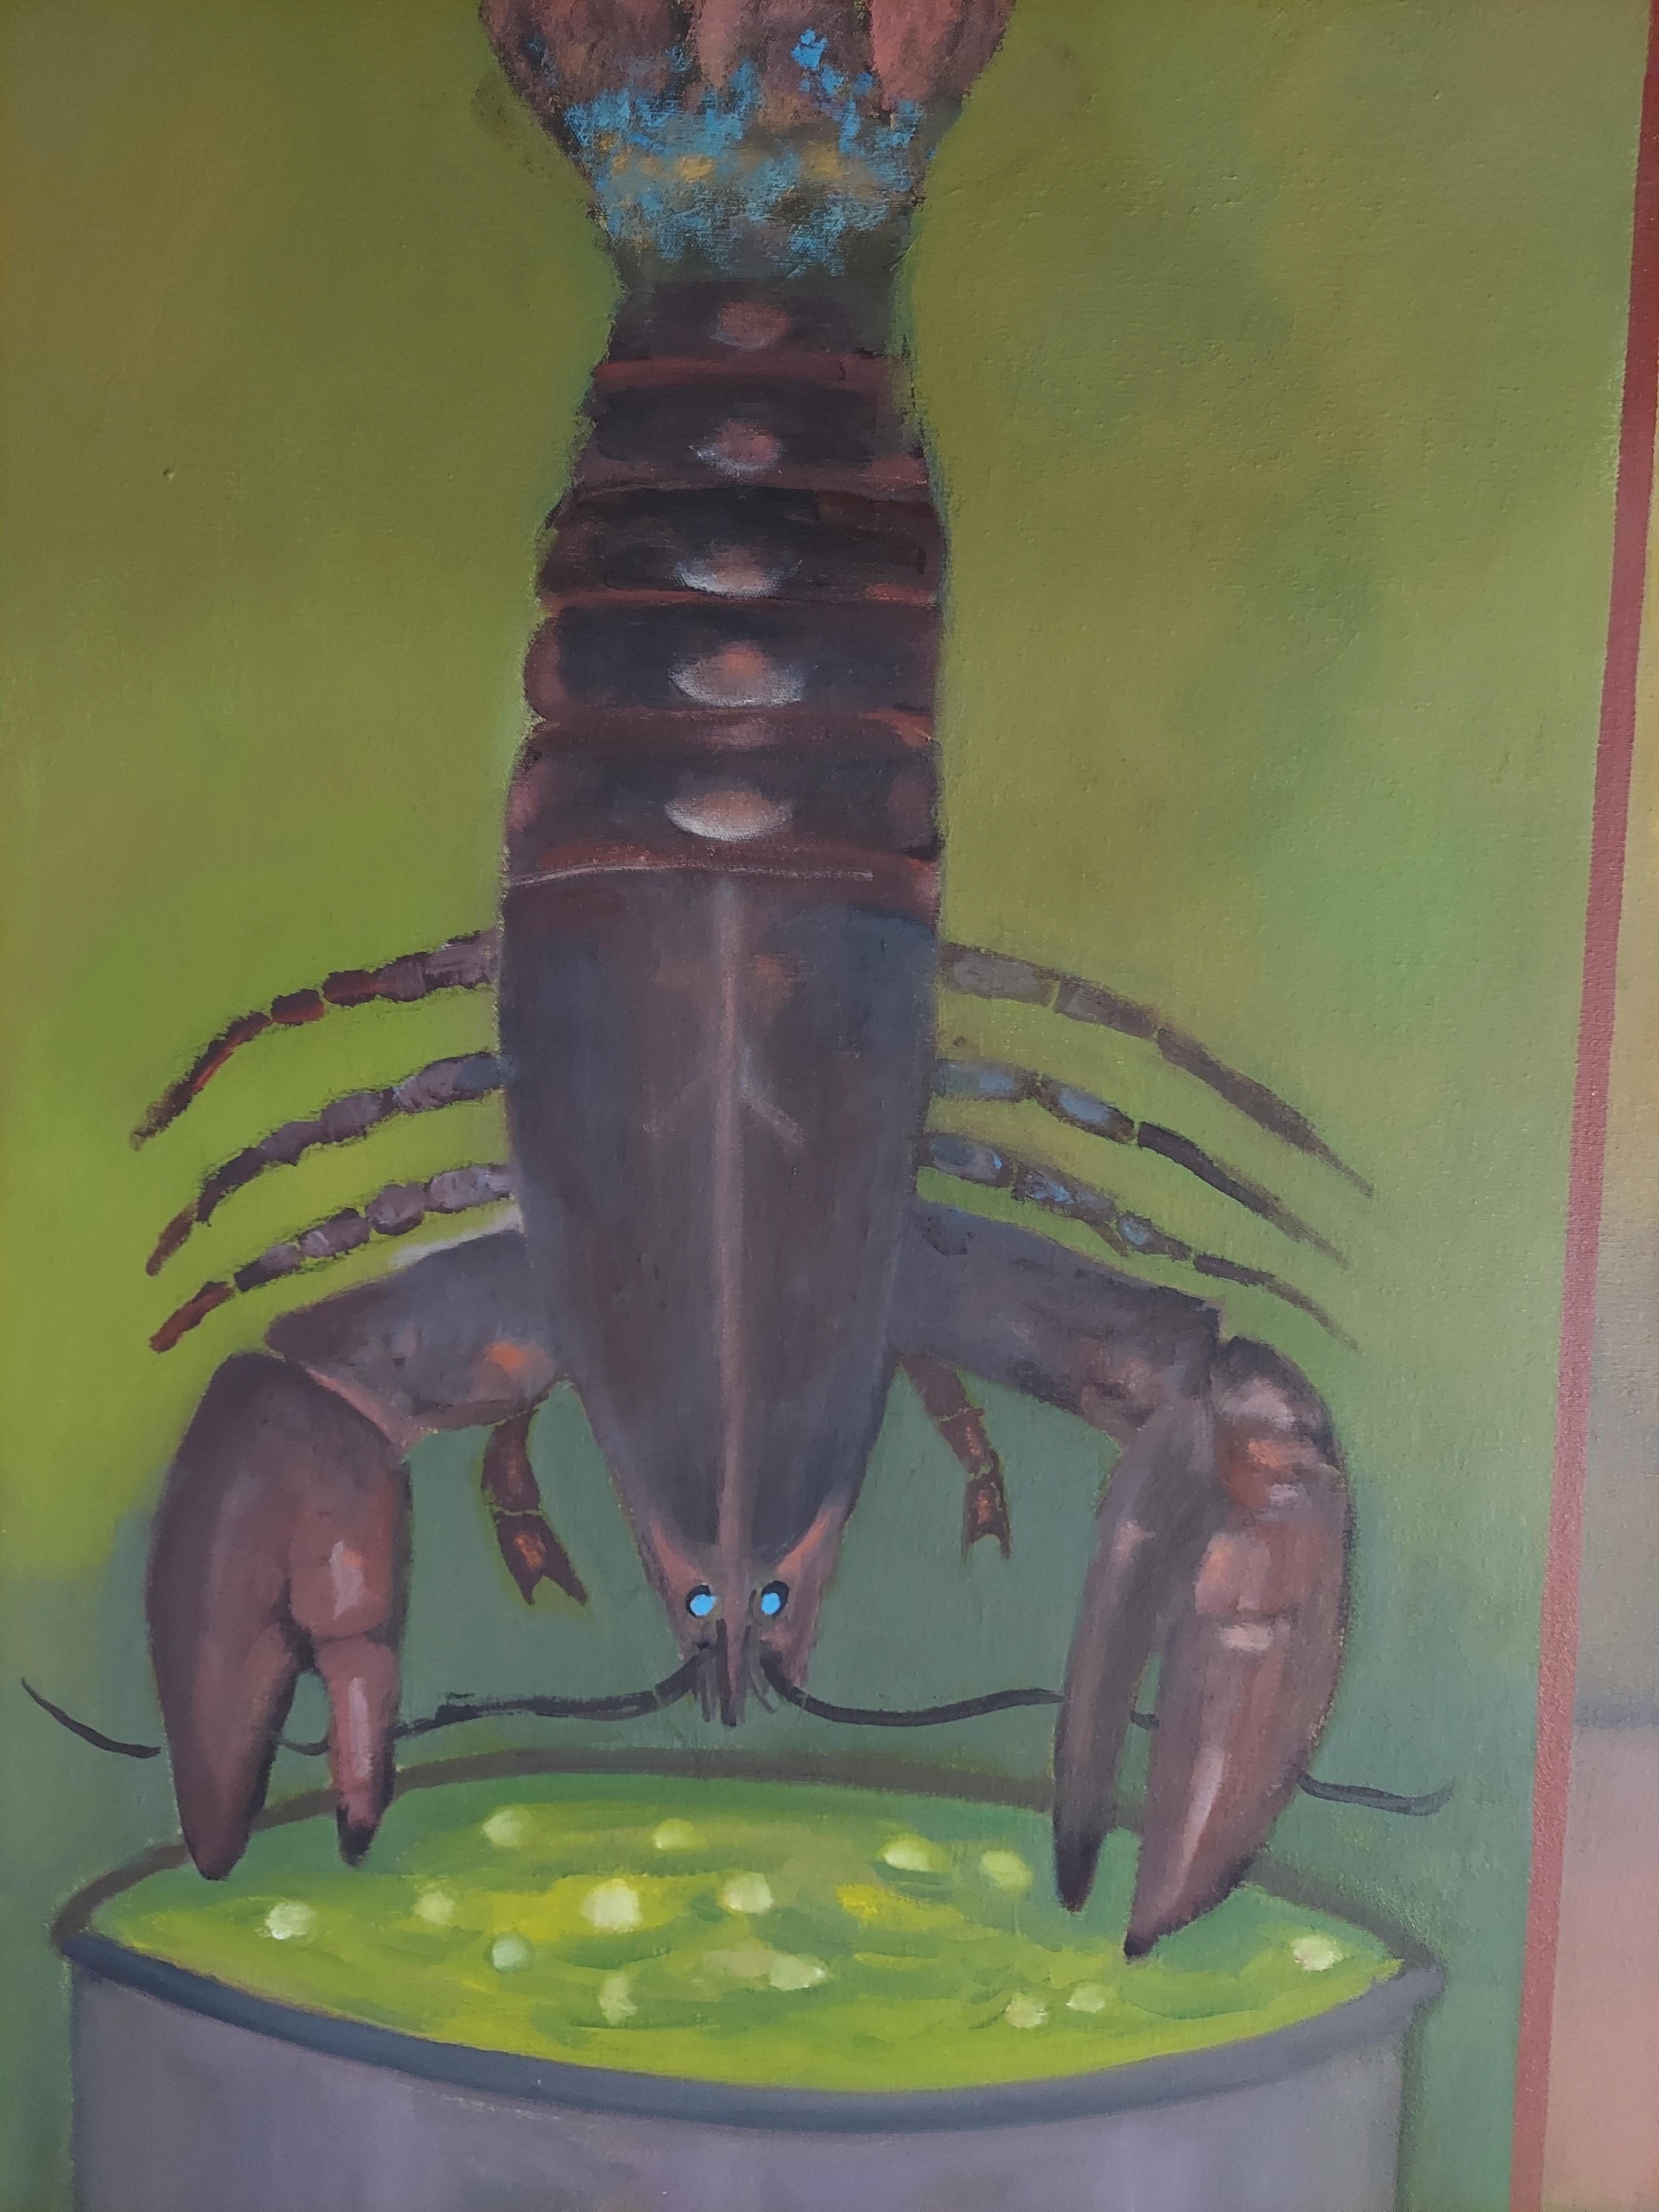 This triptych-like lobster still life is only one of four paintings in this format by the artist. It is not a true triptych, as it is one large single canvas with three distinct images depicting the lobster journey from pot to plate. It would make